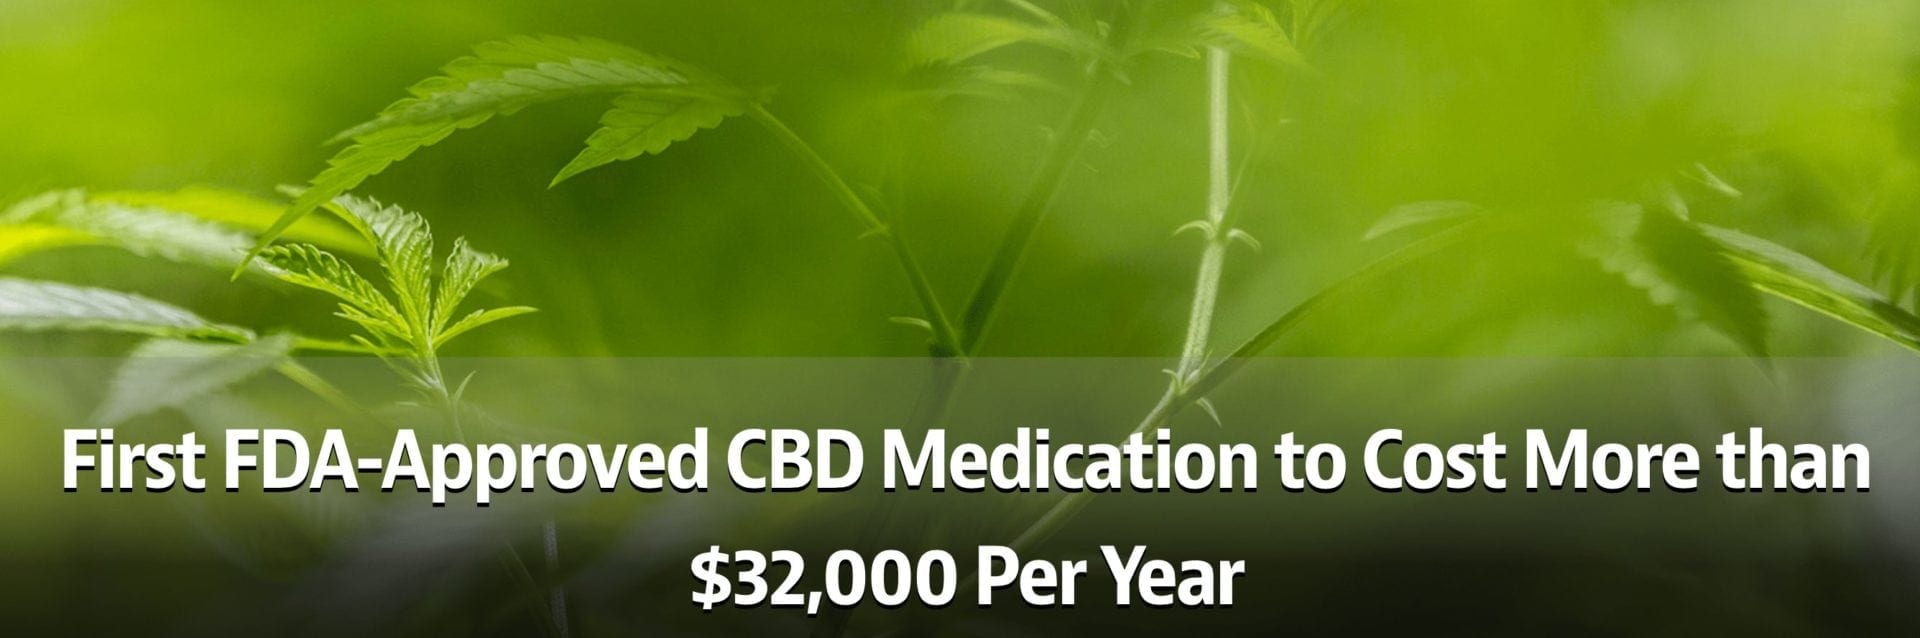 First FDA-Approved CBD Medication to Cost More than $32,000 Per Year